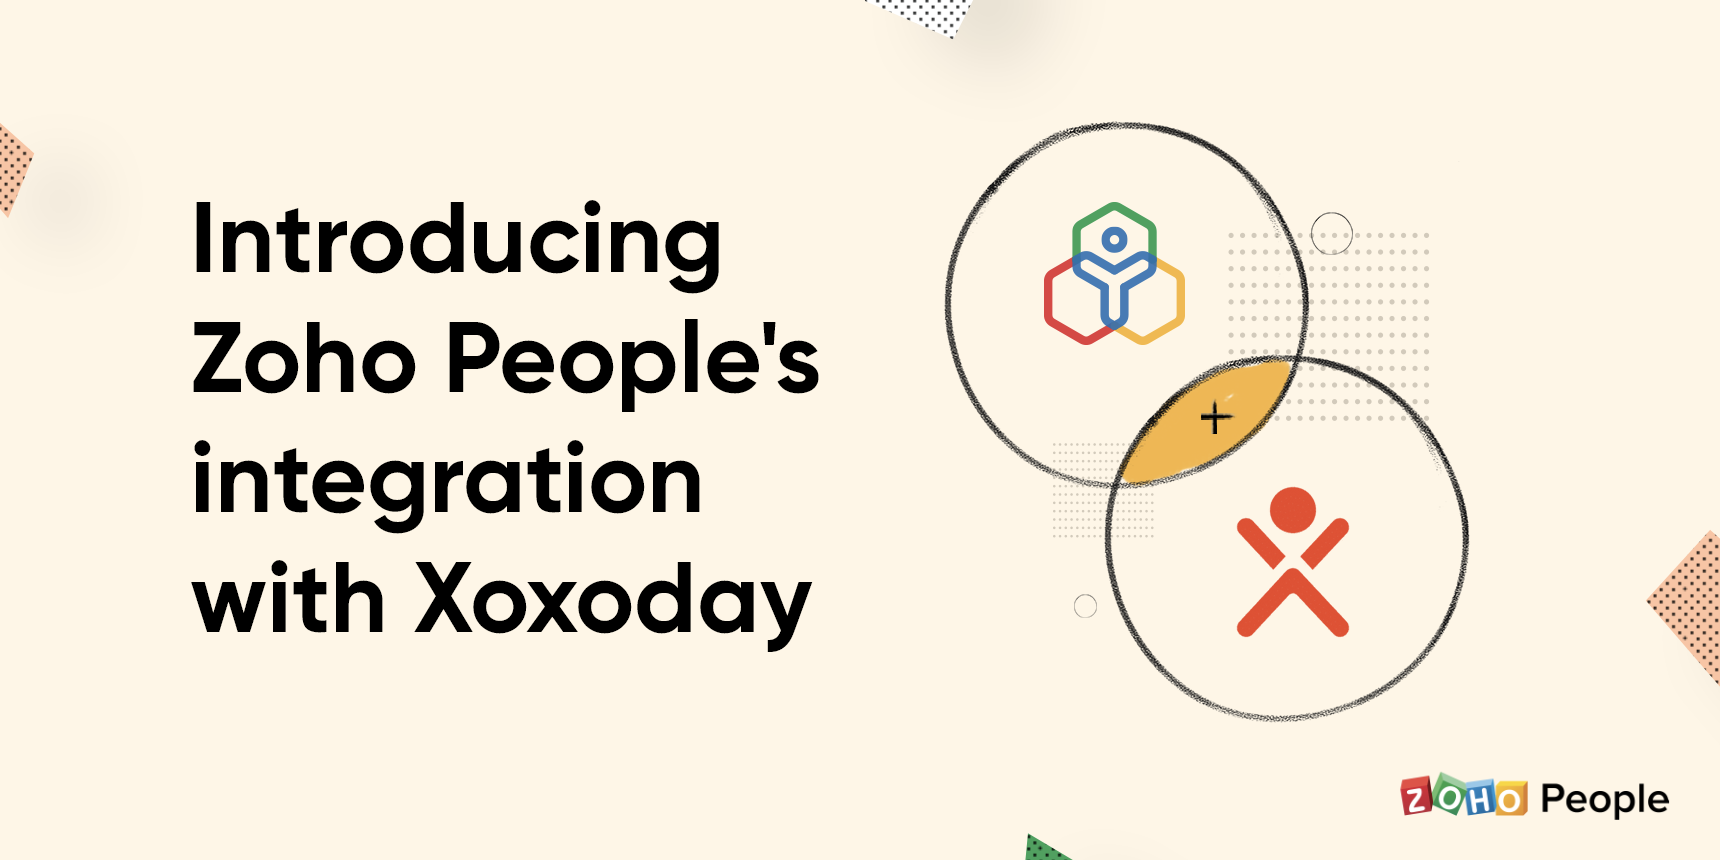 Motivate your employees with rewards and recognition: Zoho People integrates with Xoxoday